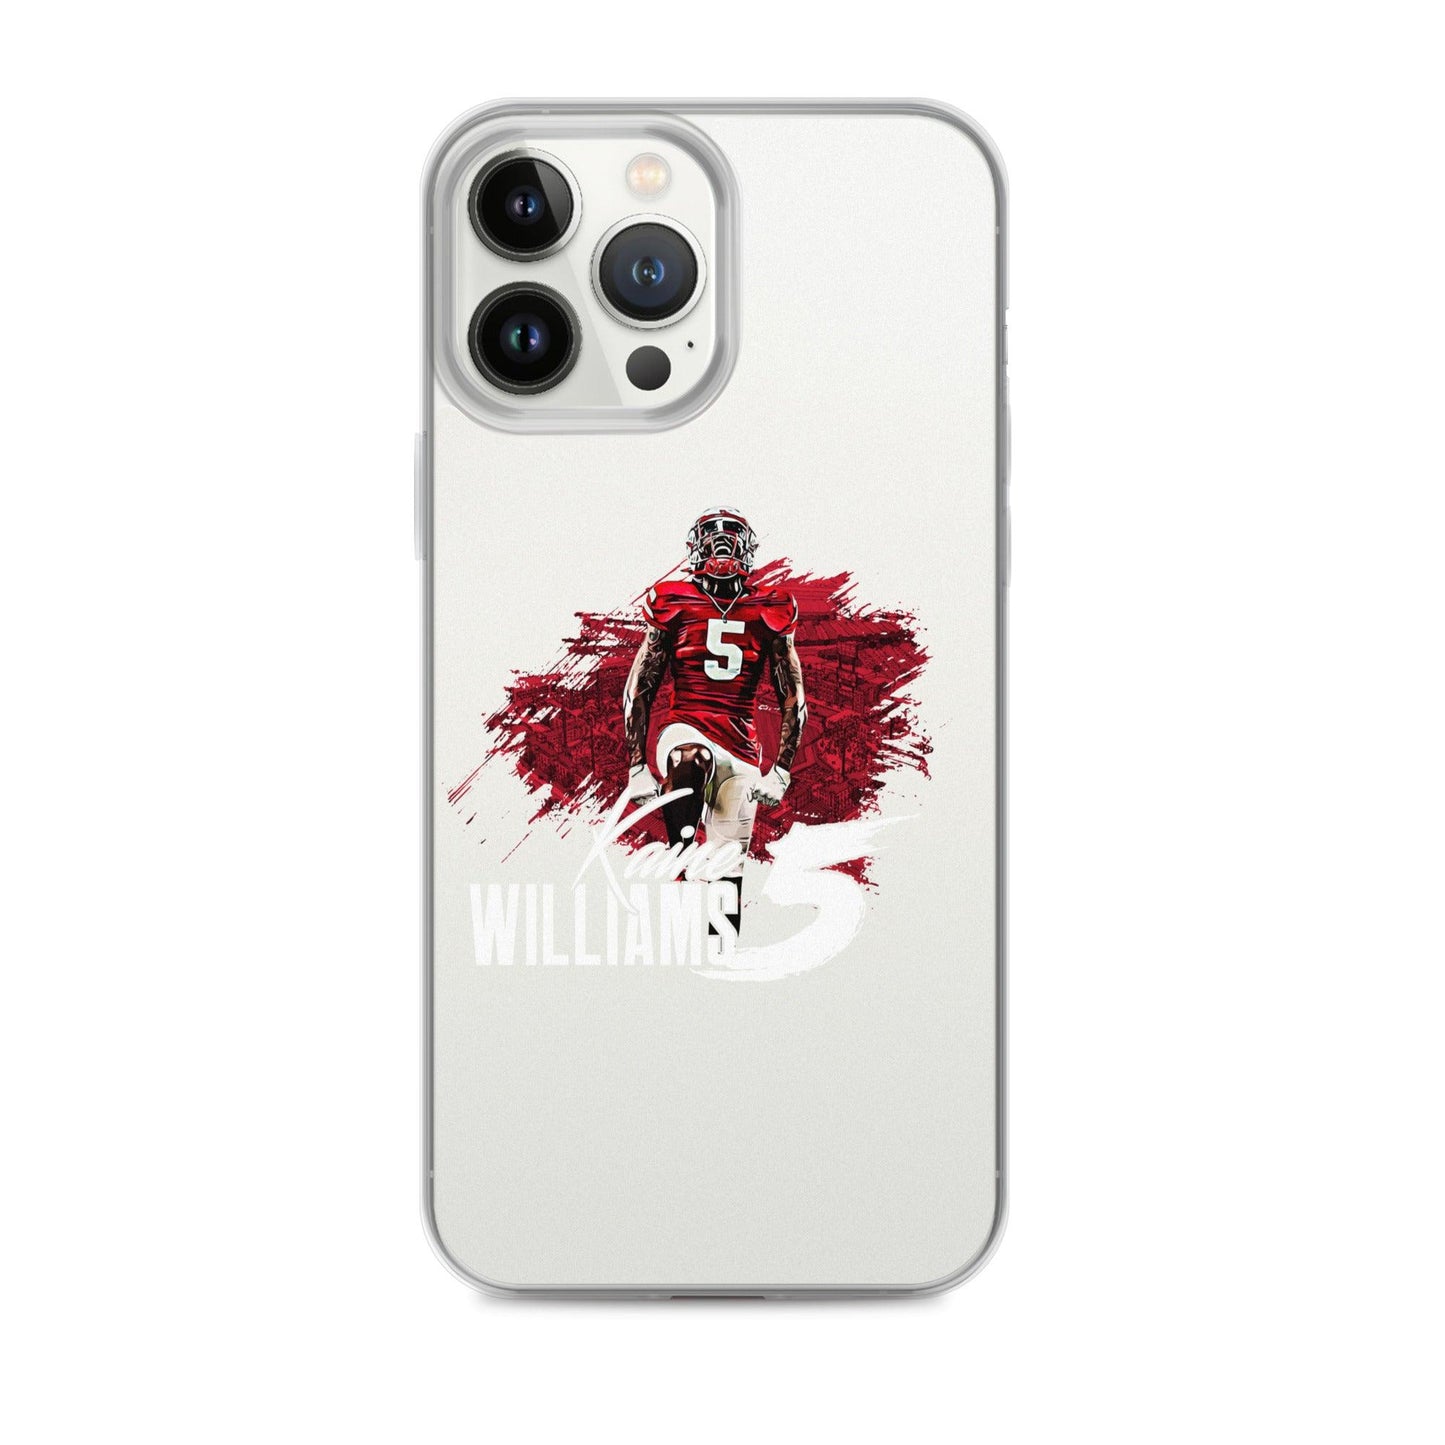 Kaine Williams "We Ready" iPhone Case - Fan Arch